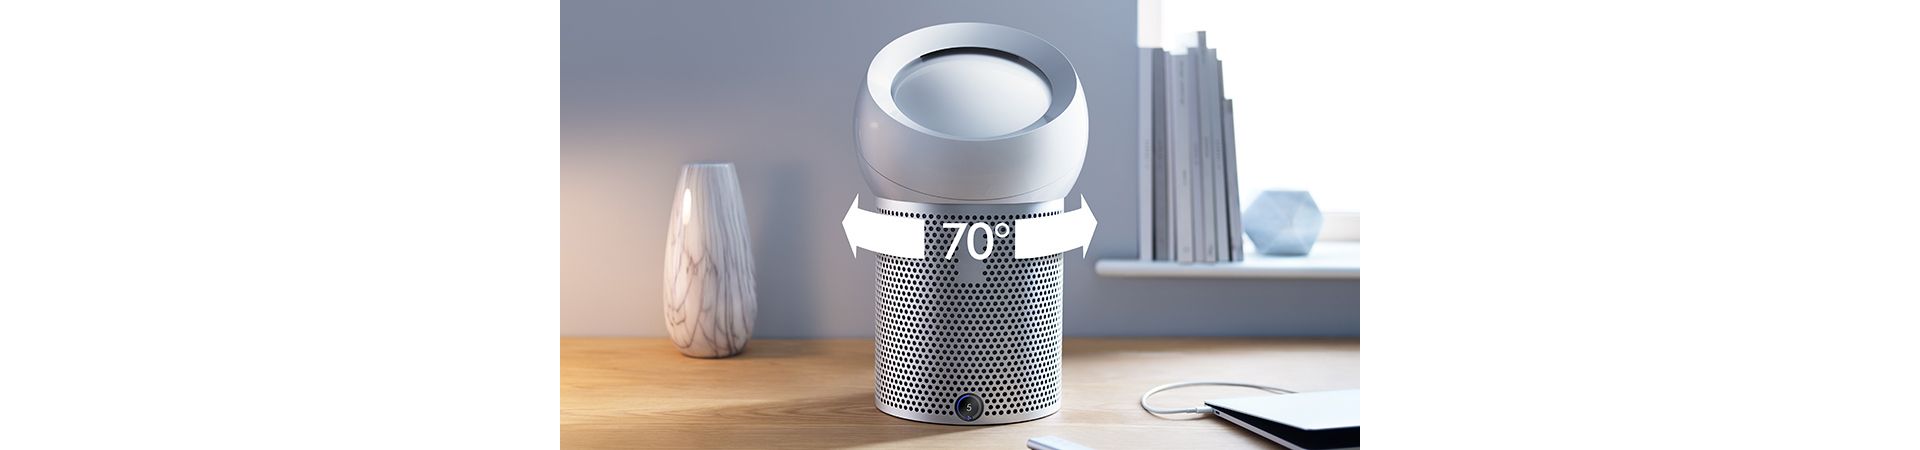 Airflow travels through the Dyson personal purifier fan's apertures, on each side of the convex dome. The jets of air meet and a high-pressure core forms. Purified air coalesces and is projected from the Dyson Pure Cool Me.